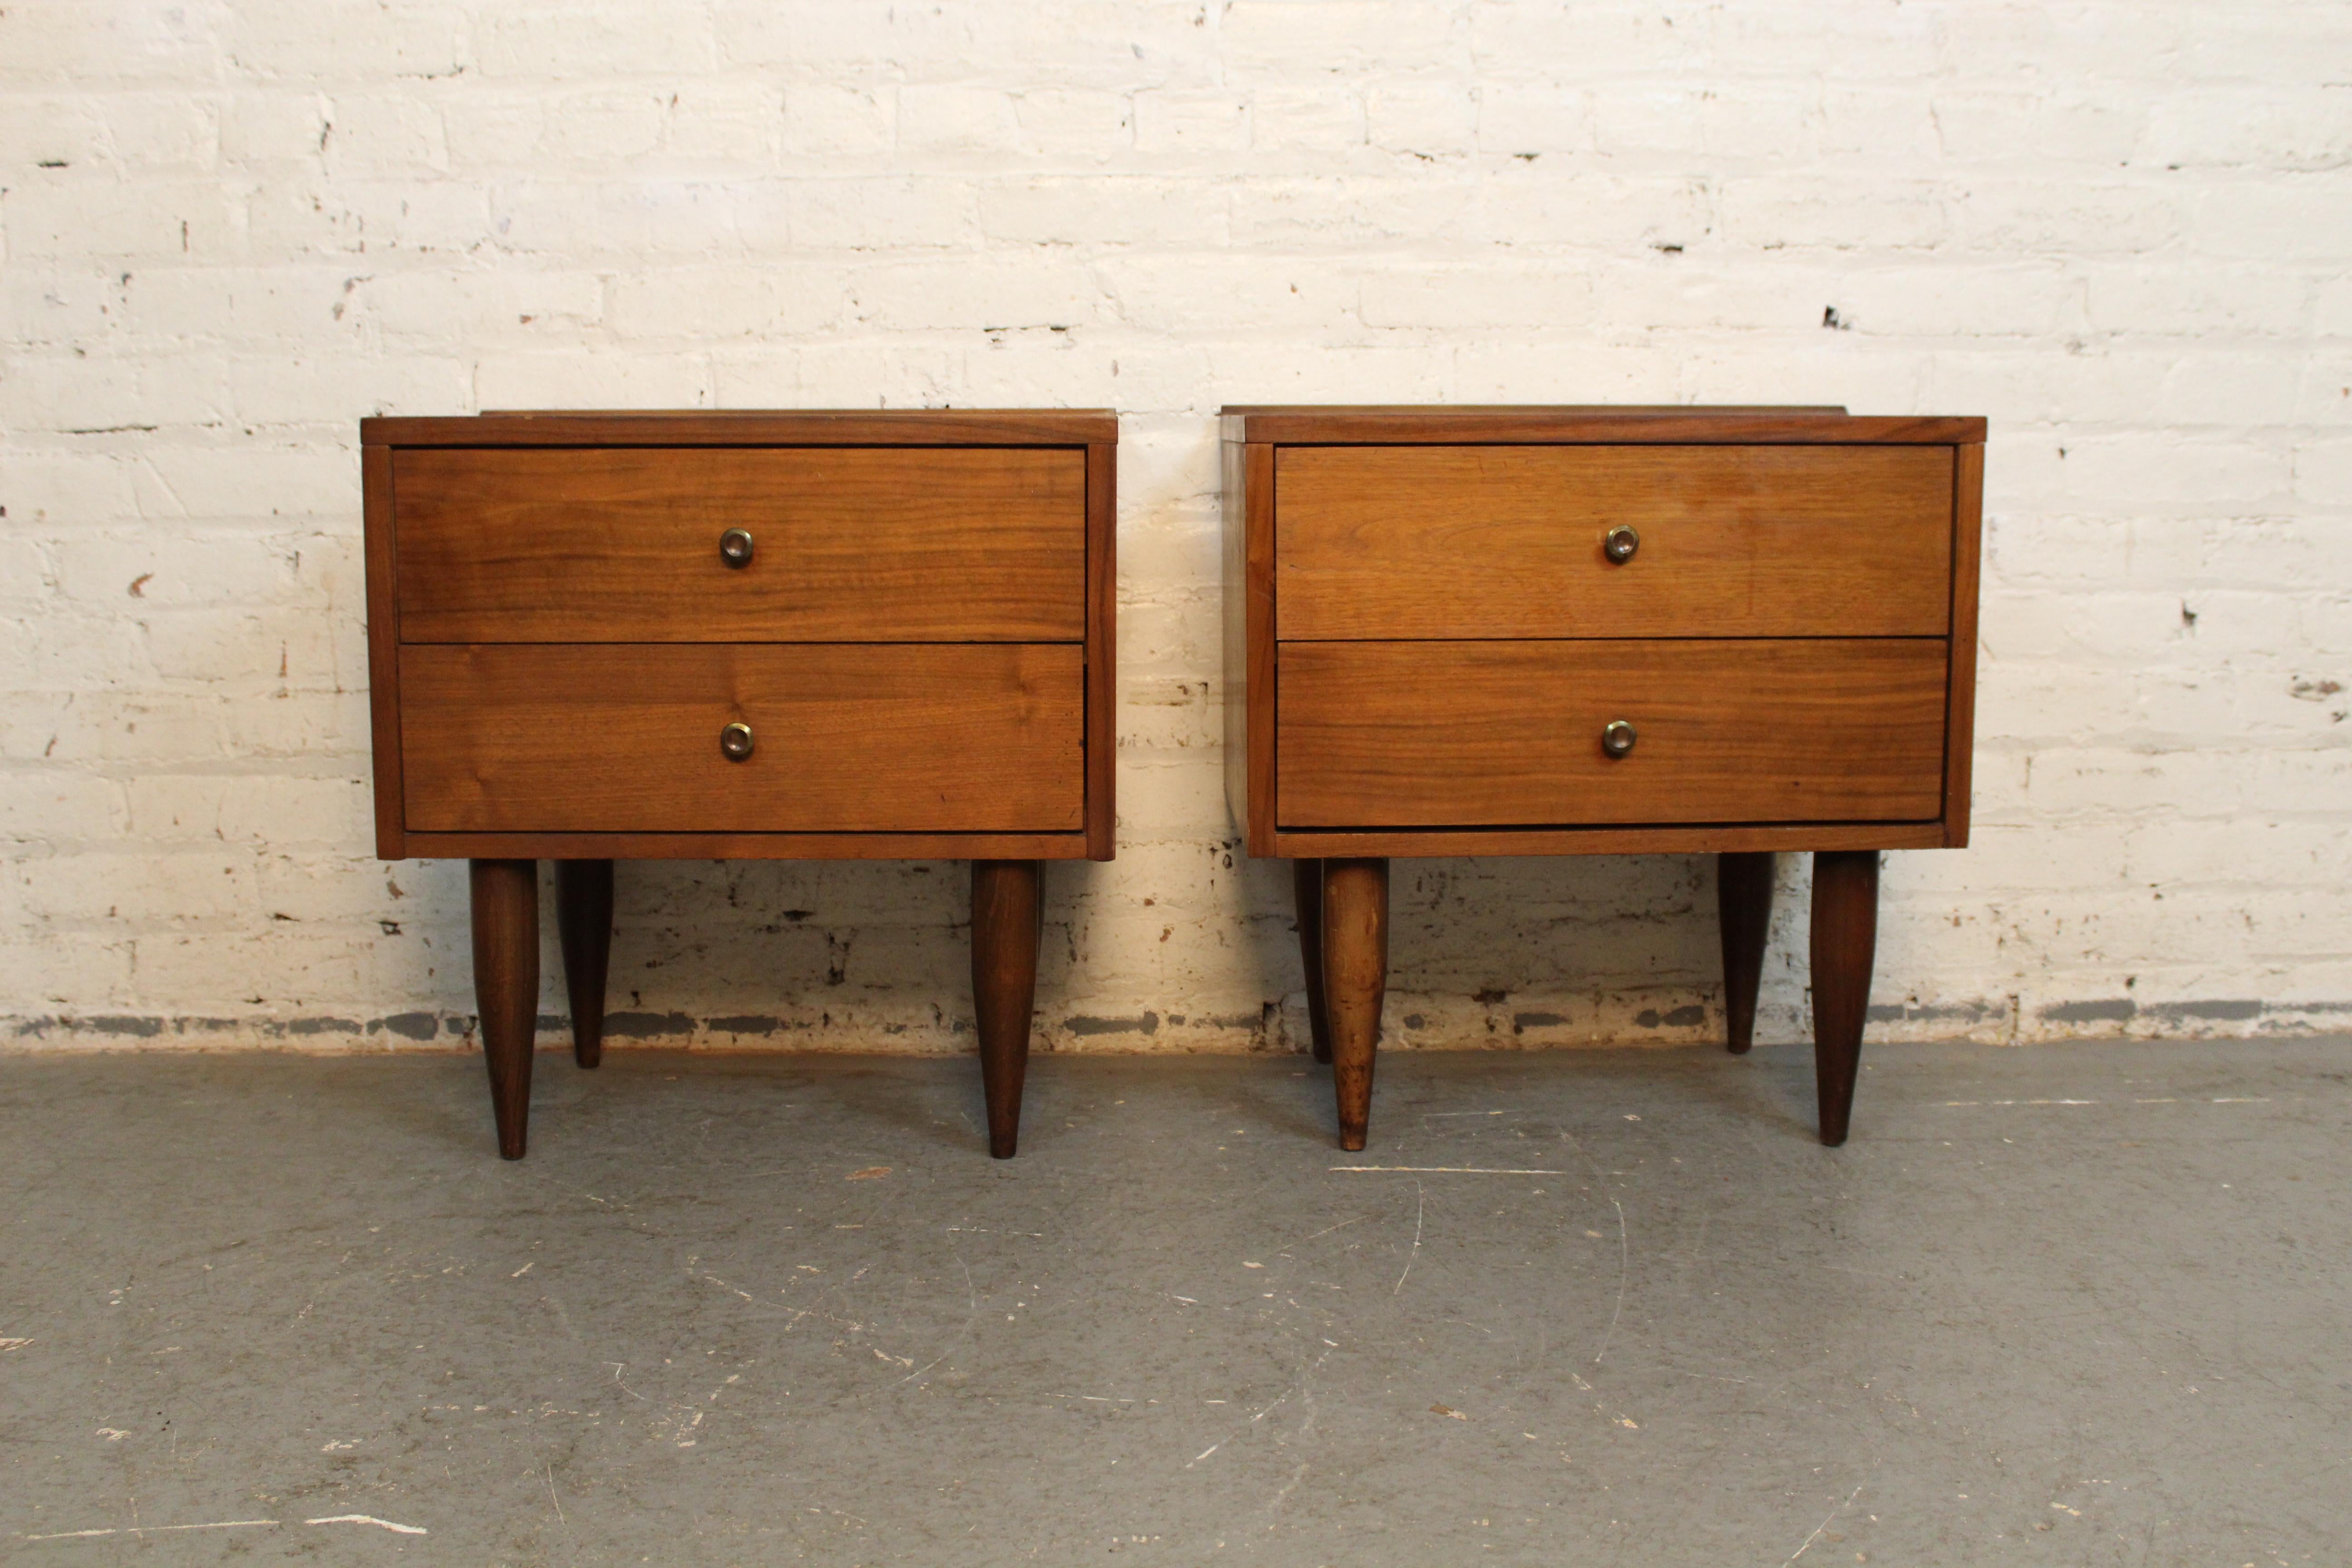 Don't miss out on this fantastic pair of genuine mid-century modern nightstands originally from the world's biggest supply house! Made by American furniture manufacturer Harmony House and exclusively sold by none other than Sears, Roebuck, and Co.